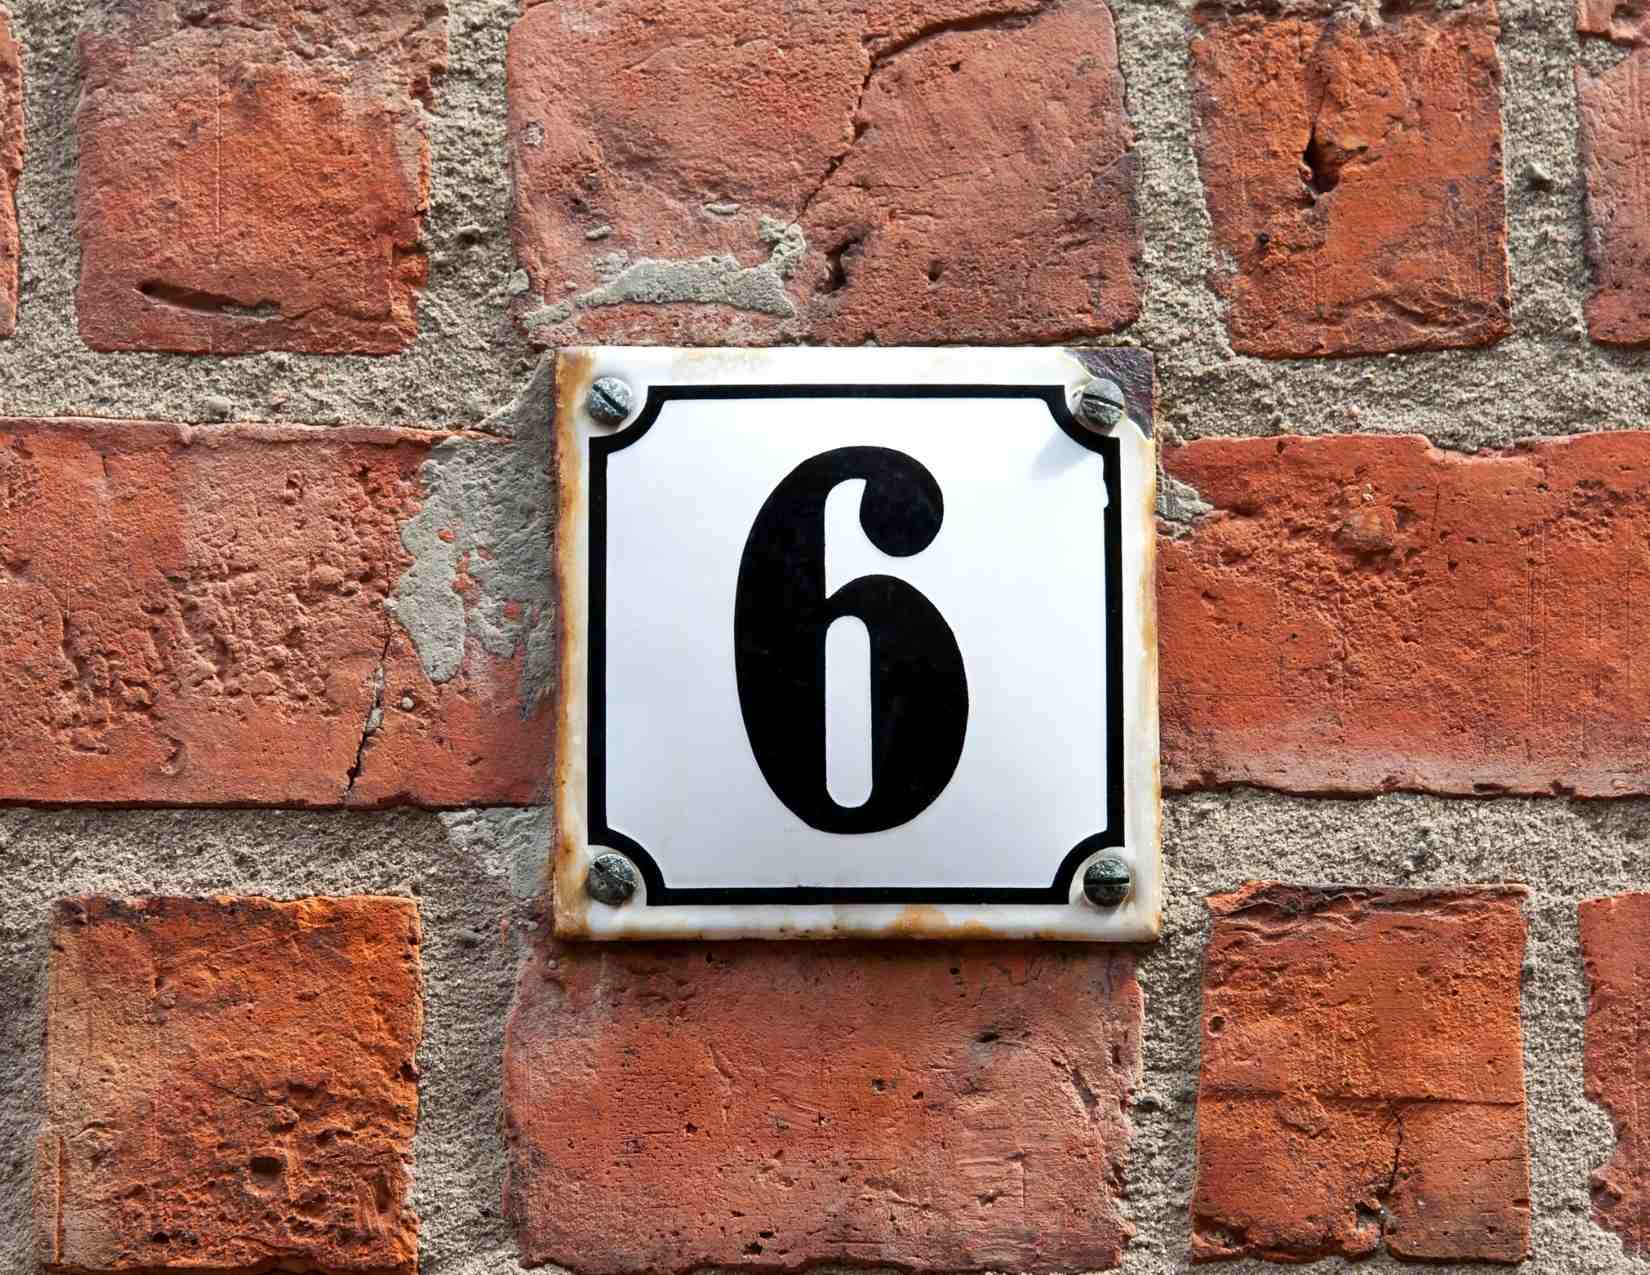 The number 6 inset in bricks.